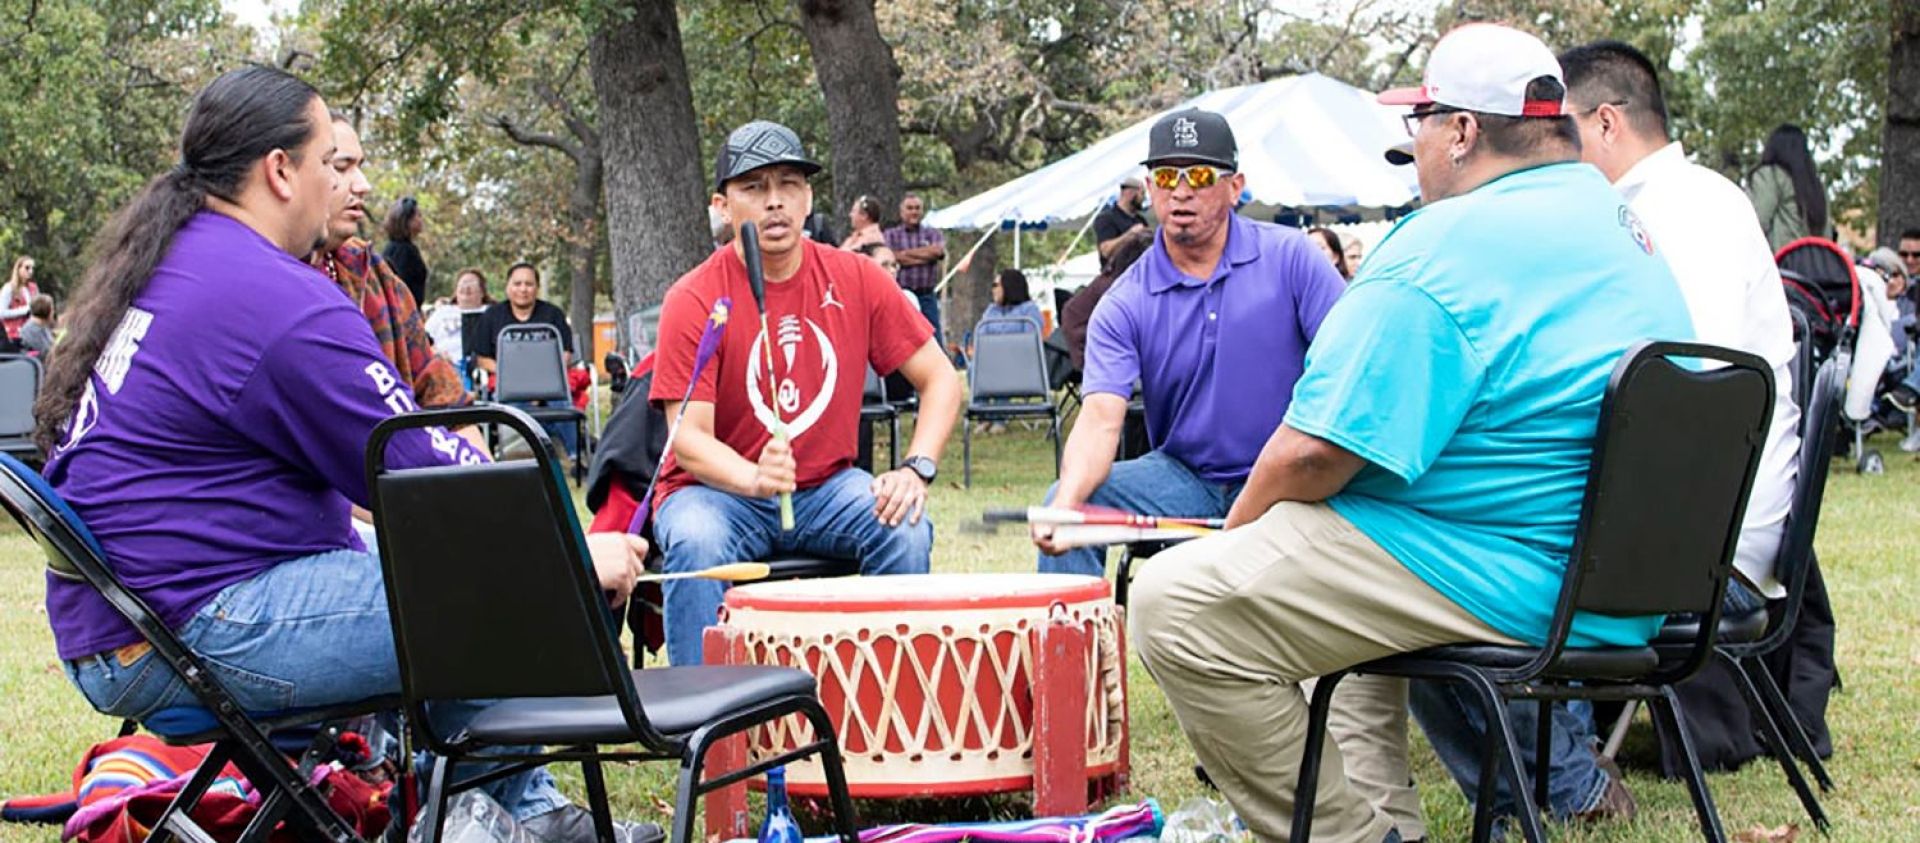 Wahzhazhe drummers and singers during an Osage Nation employee picnic and hand game (2019).